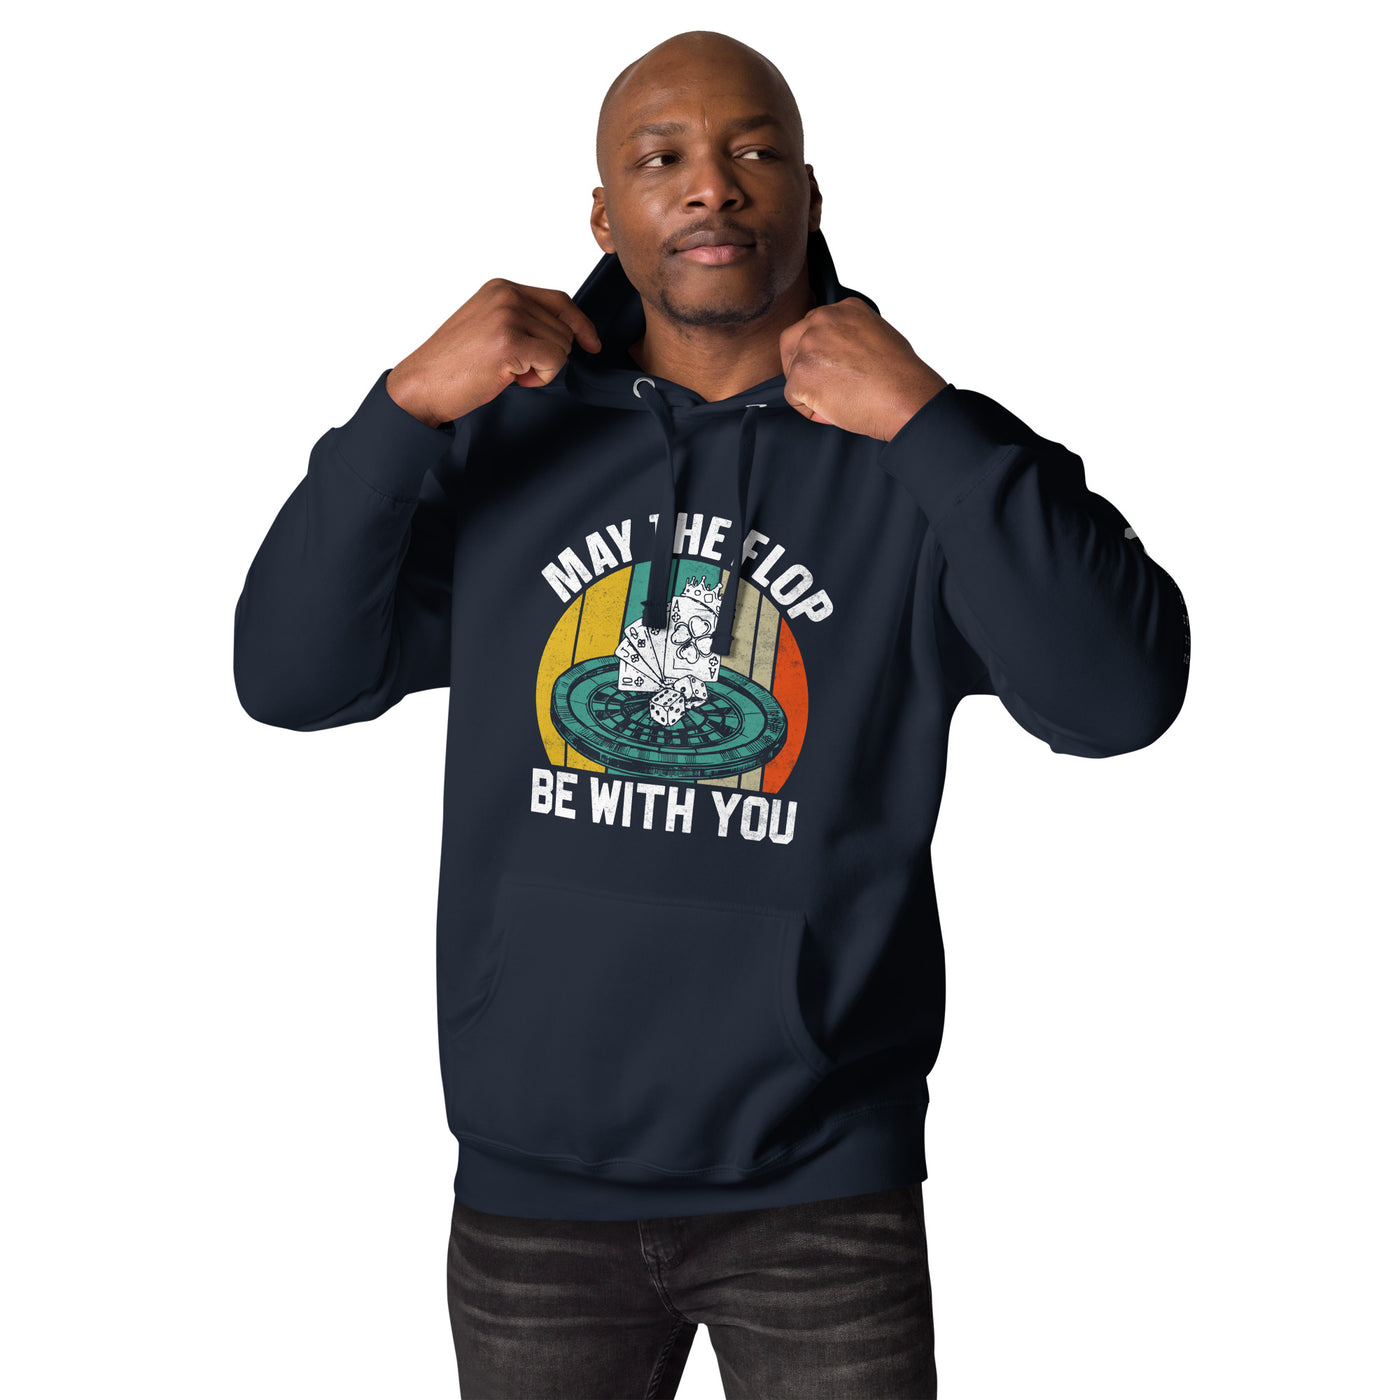 May the Flop be with you - Unisex Hoodie